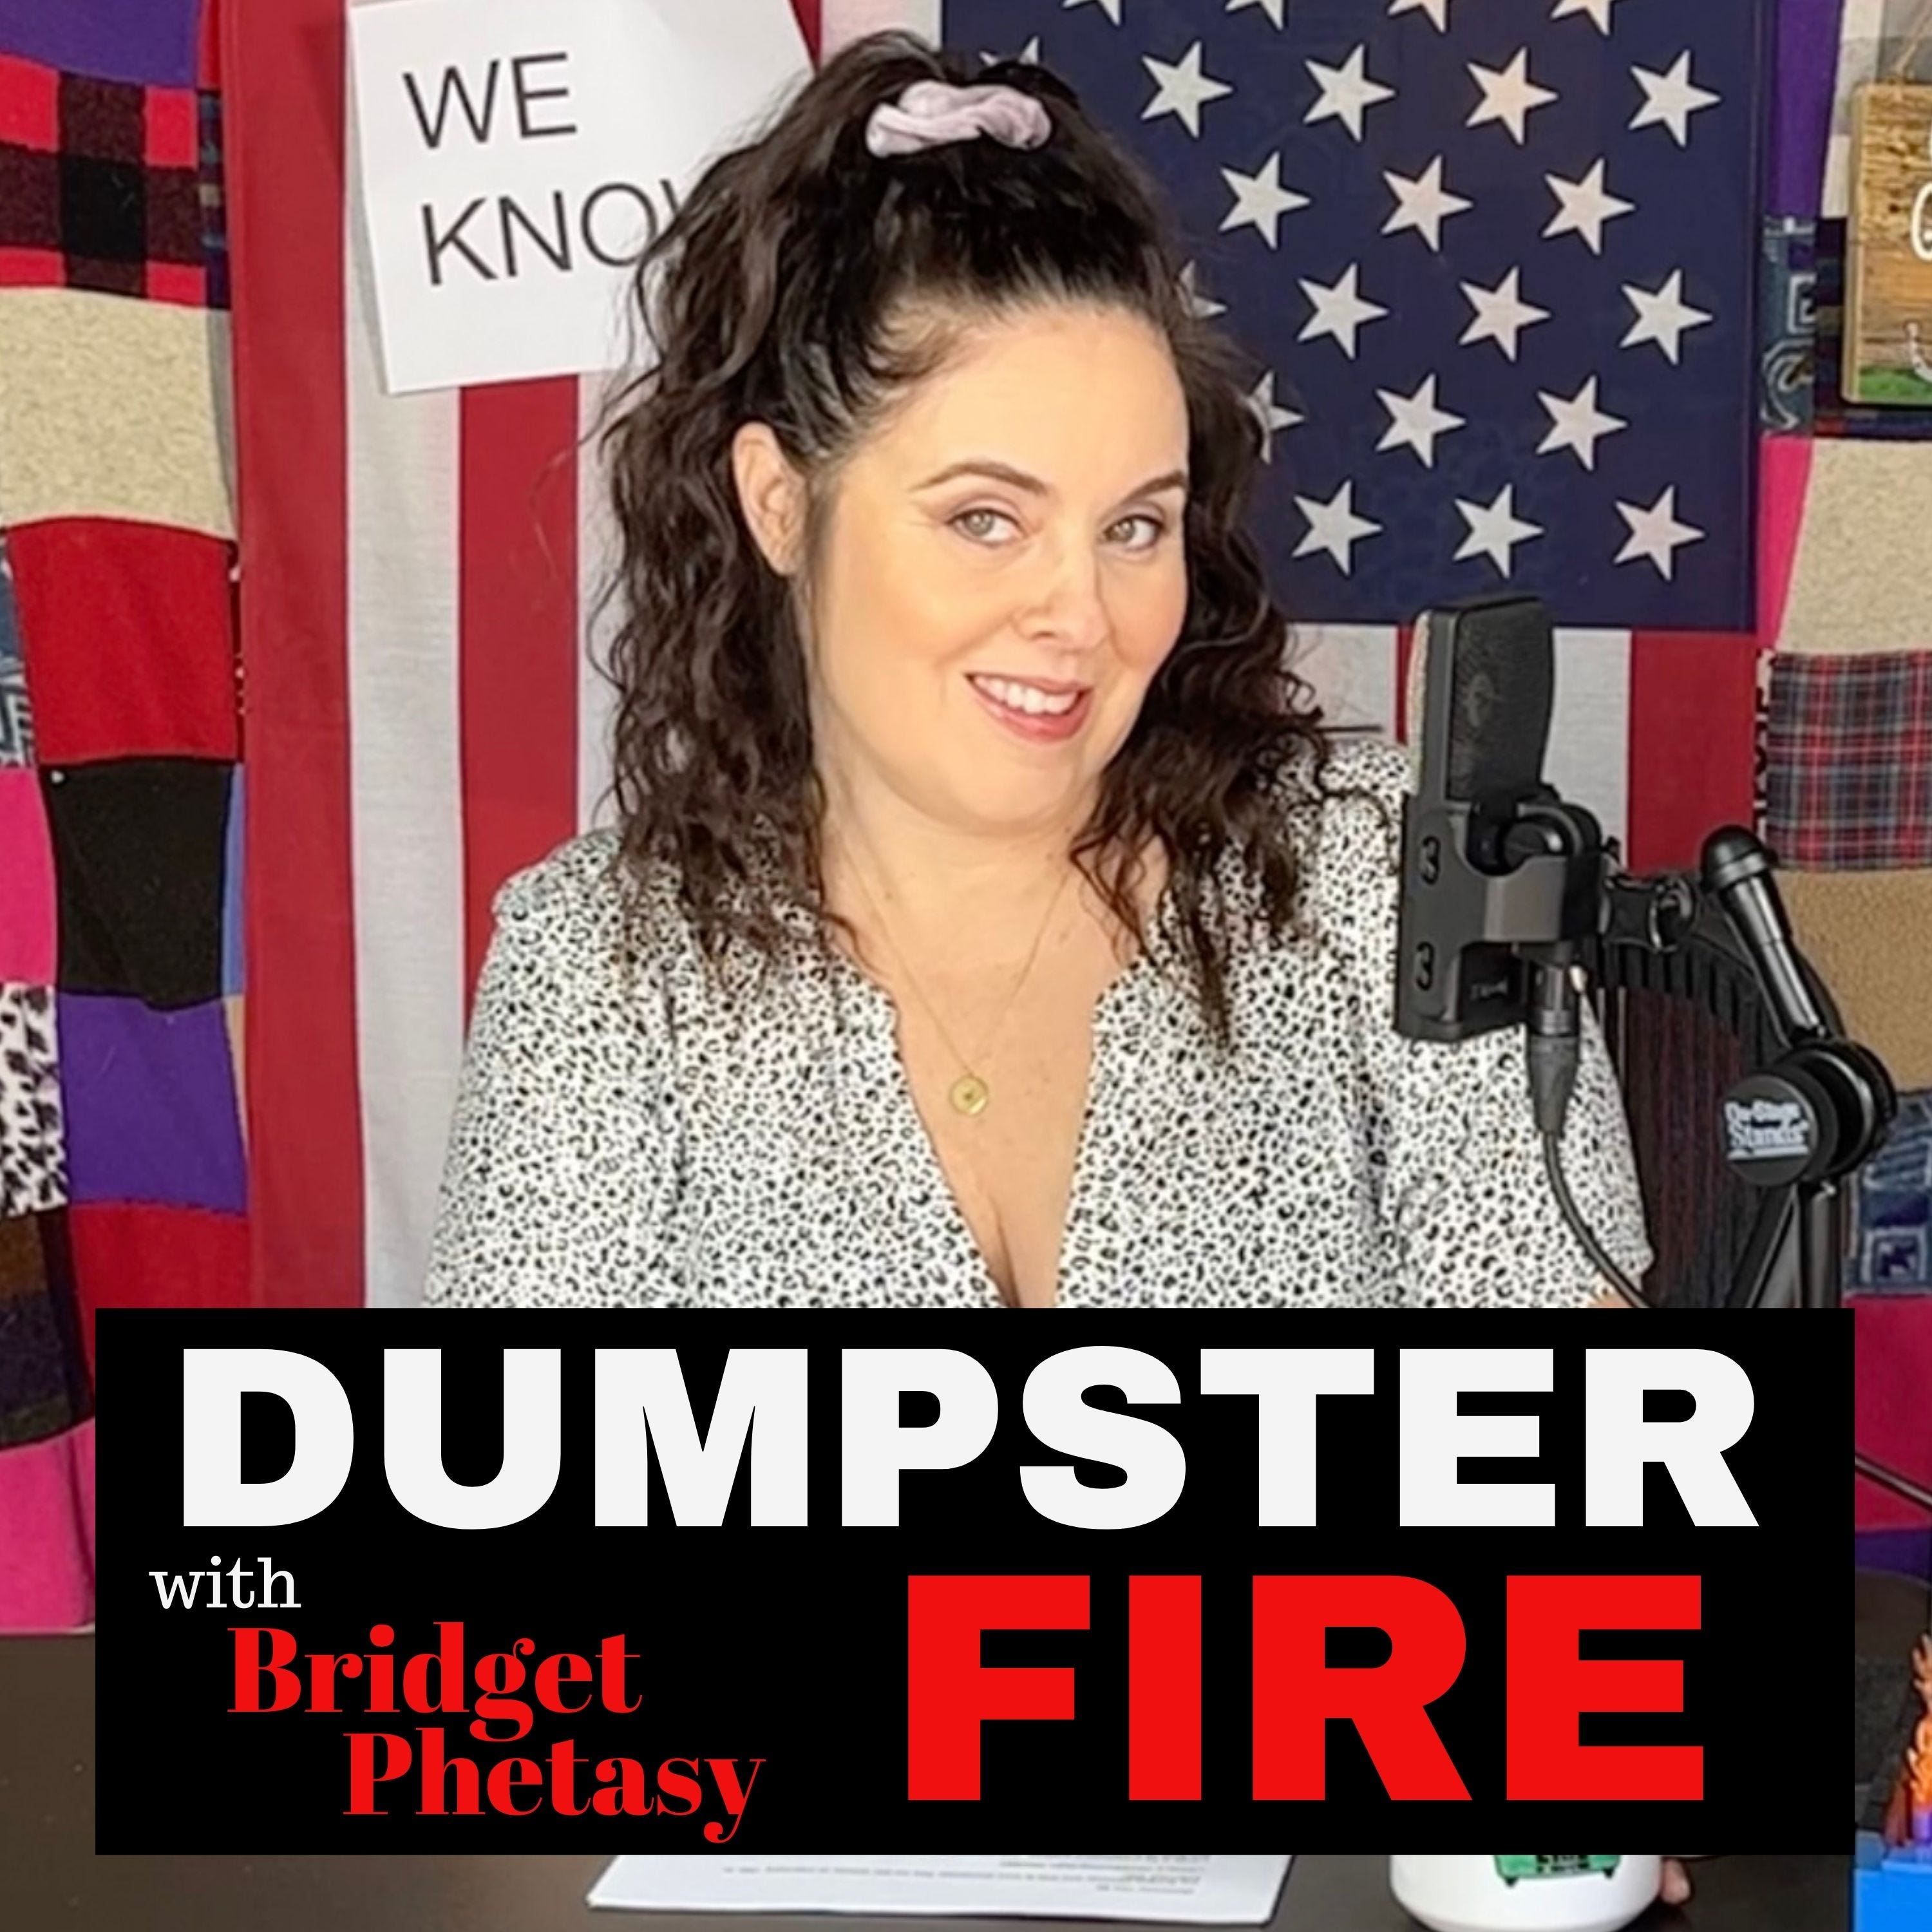 Dumpster Fire 85 - The Chernobyl of Bad Takes